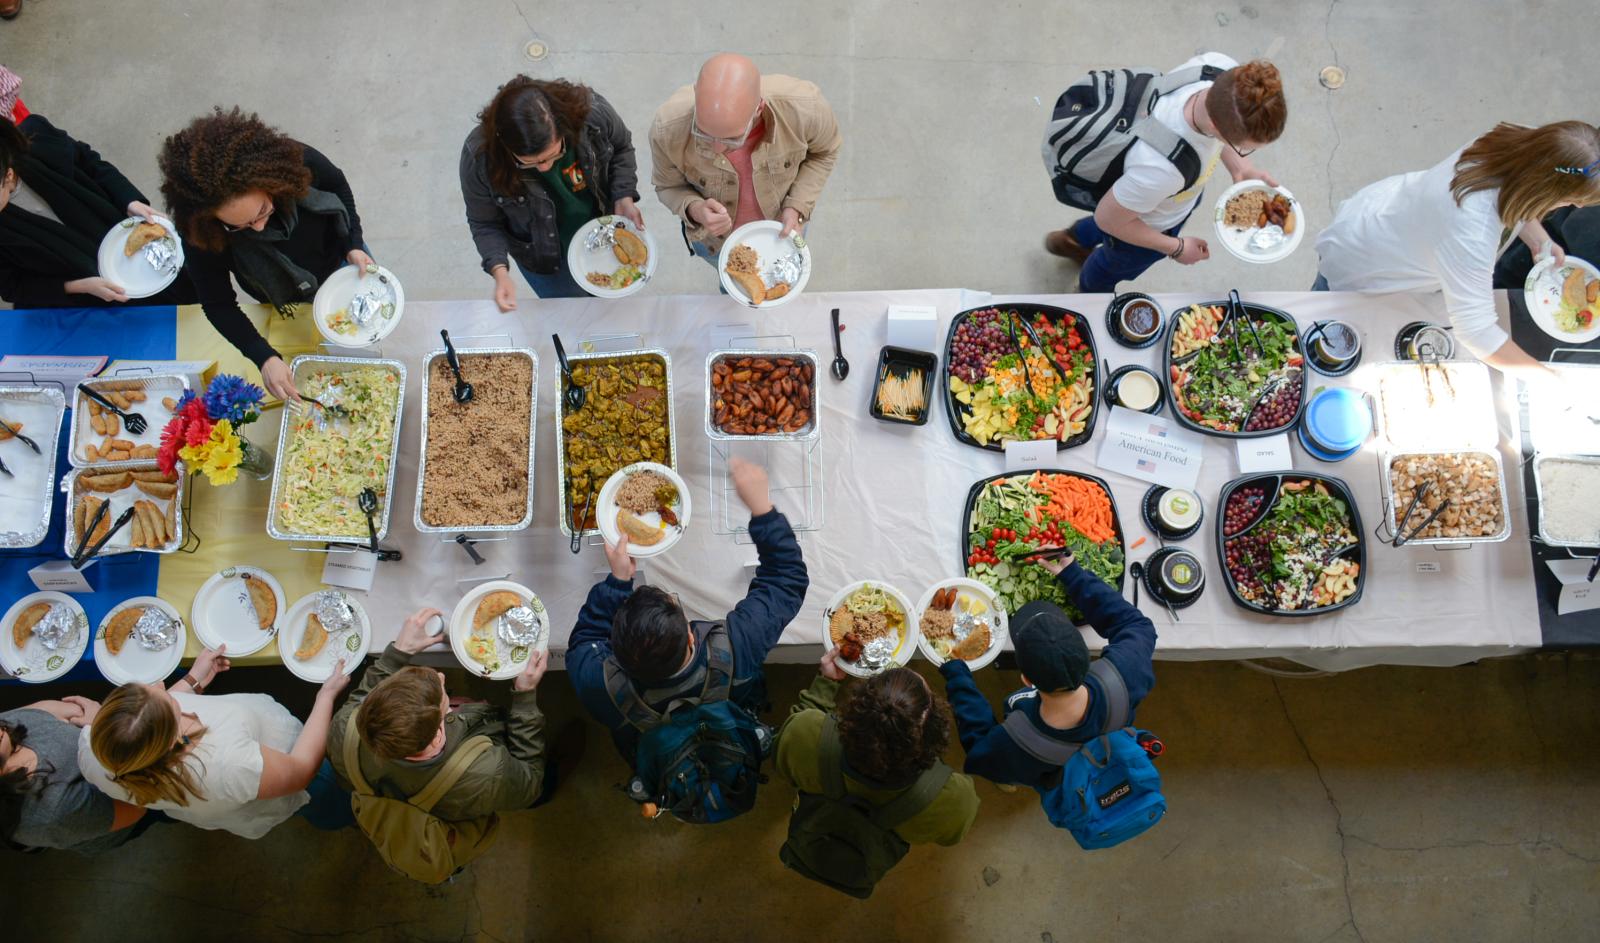 Community lunch, aerial view of buffet table